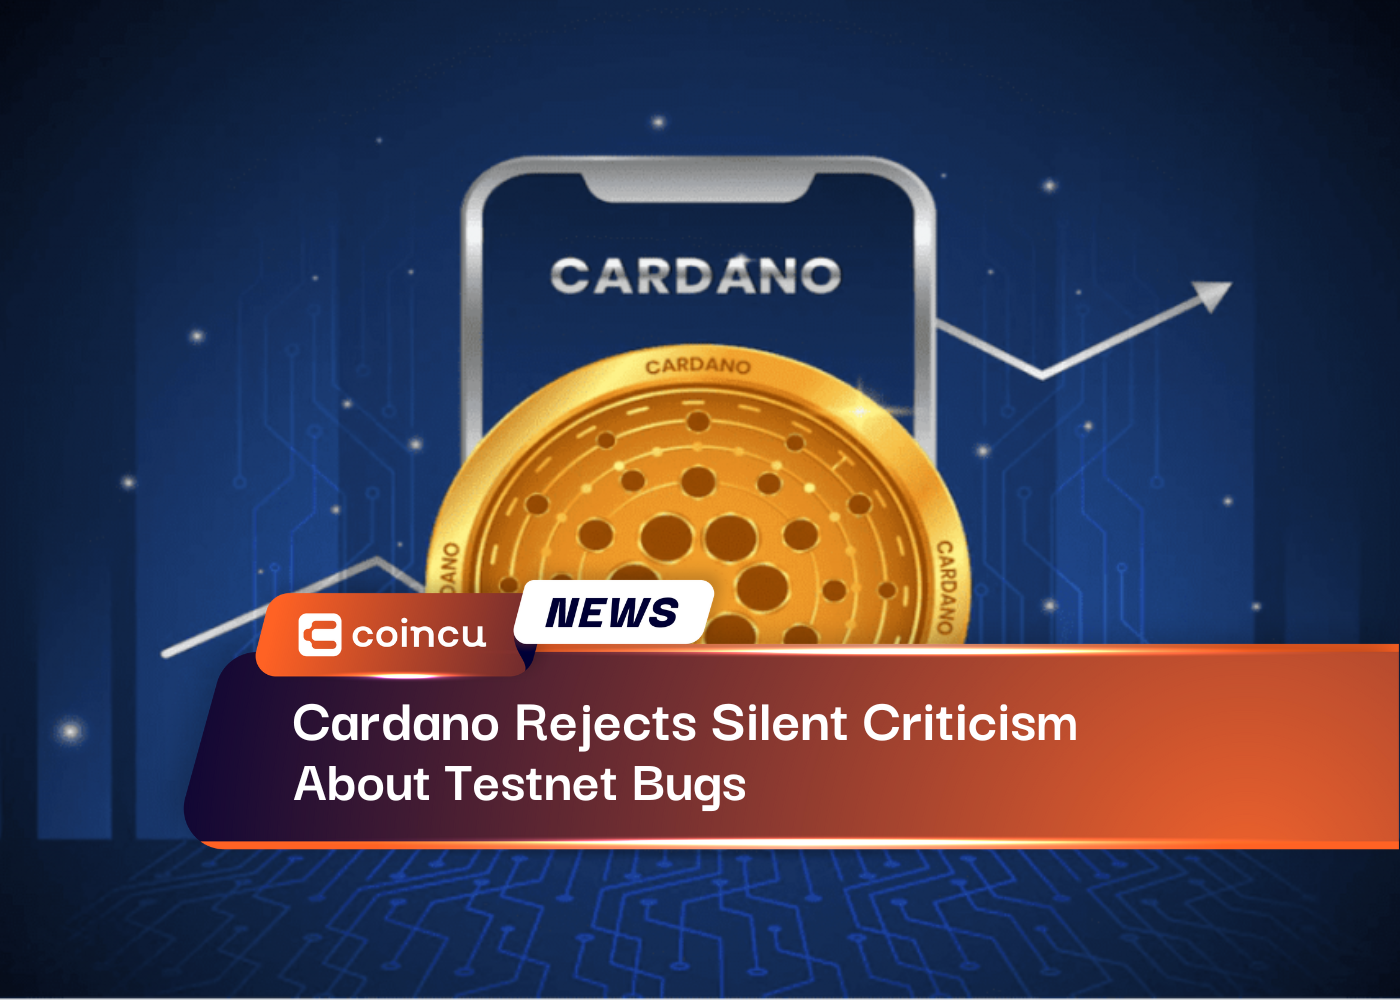 Cardano Rejects Silent Criticism About Testnet Bugs